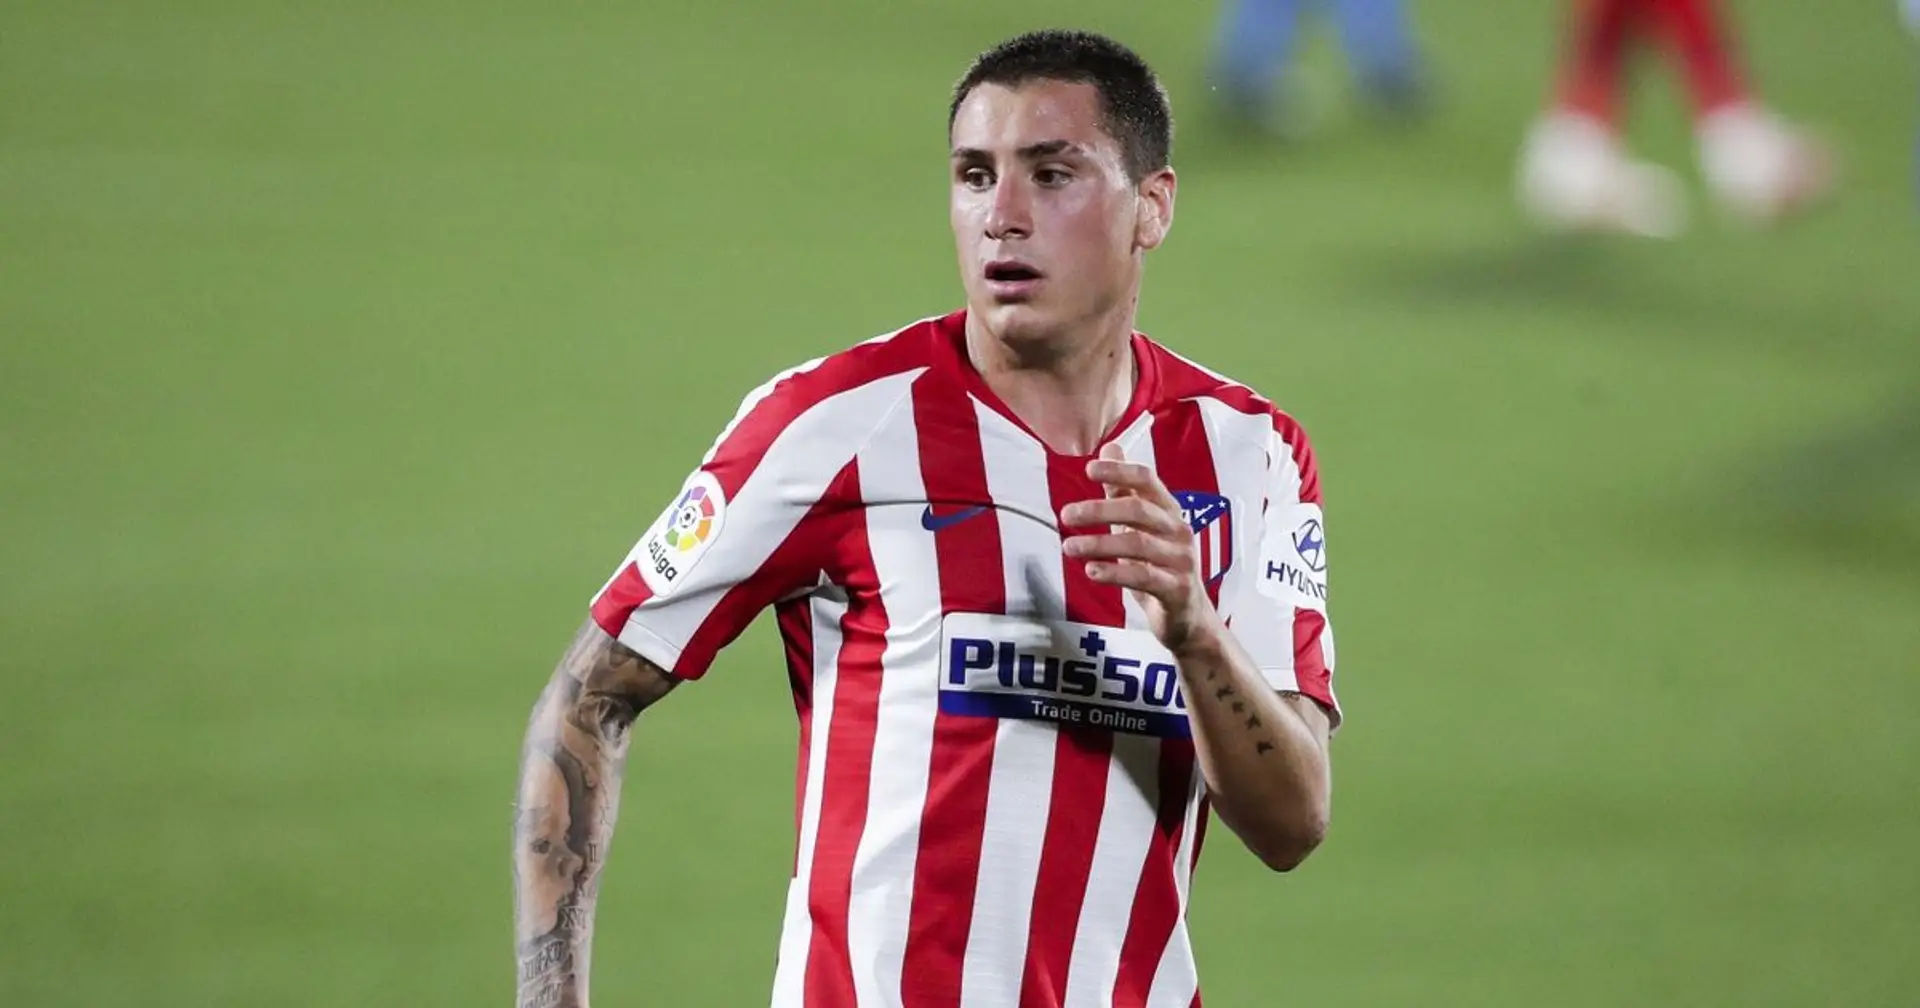 Atletico centre-back Jose Gimenez to miss Chelsea clash after calf injury in training